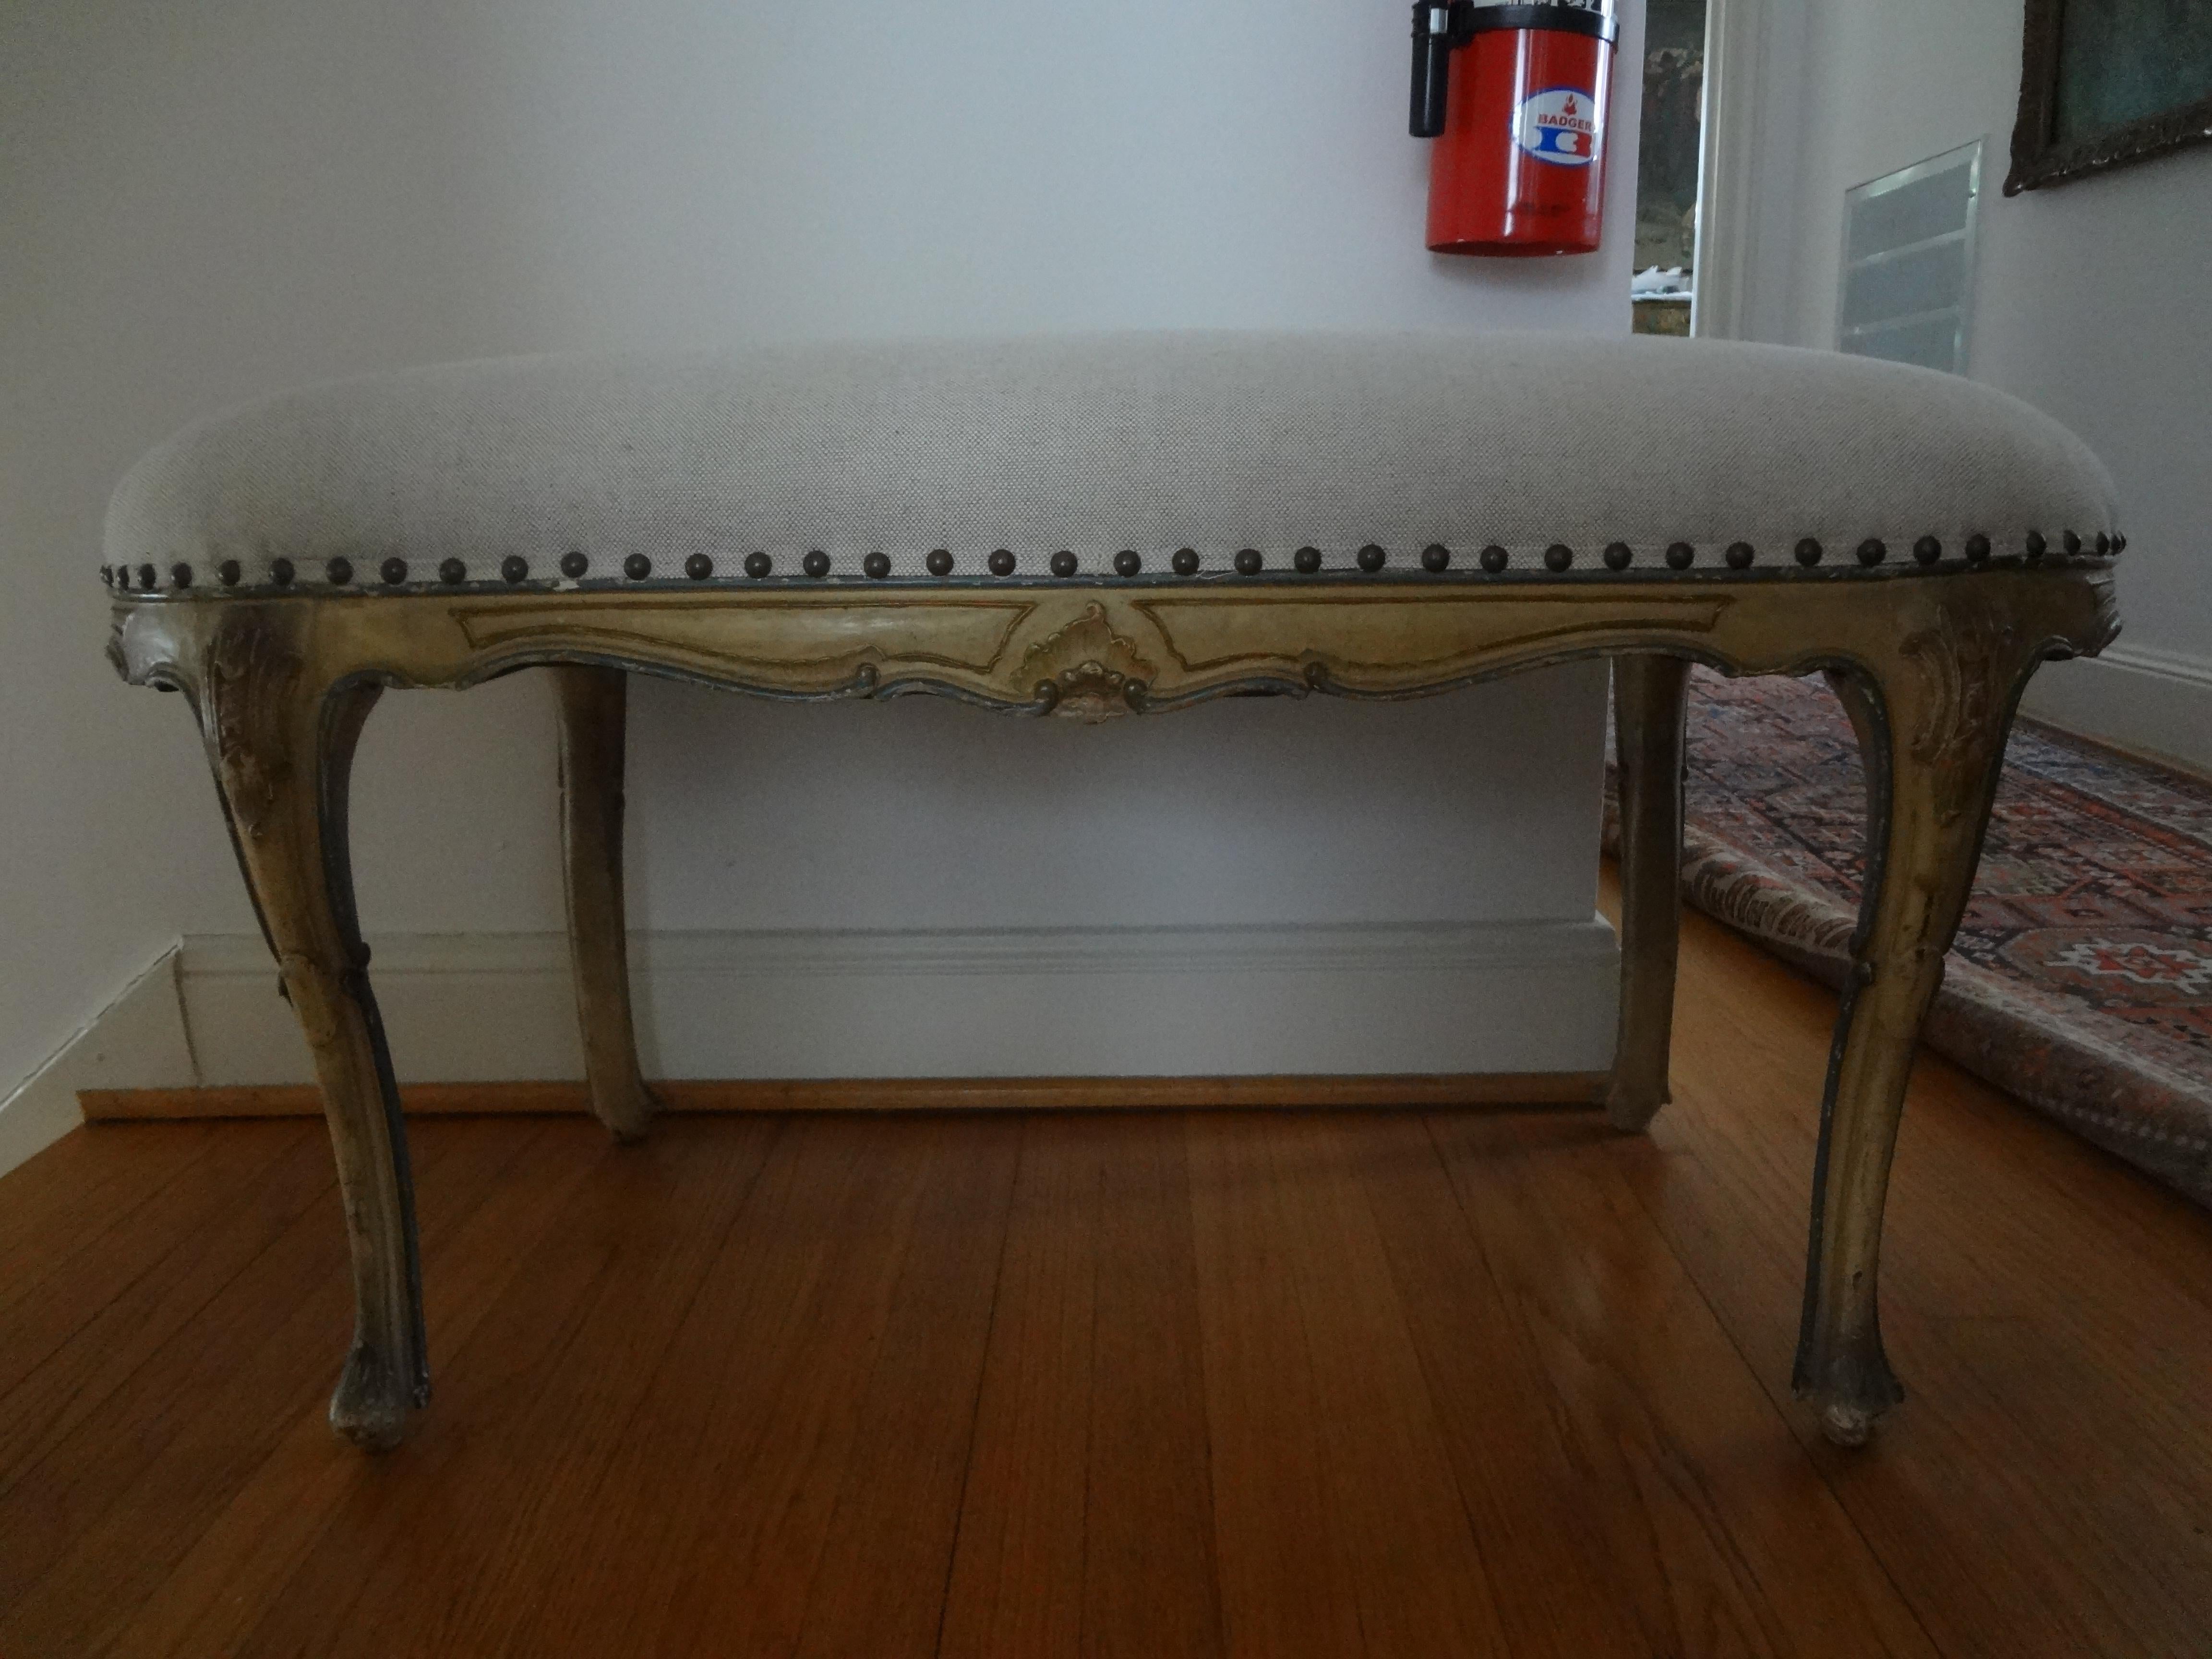 Antique Italian Regence Louis XV style painted bench.
Lovely Italian painted bench from the 1920s. This unusual antique Italian Regence-Louis XV style oval bench has been taken down to the frame and professionally upholstered in neutral oatmeal